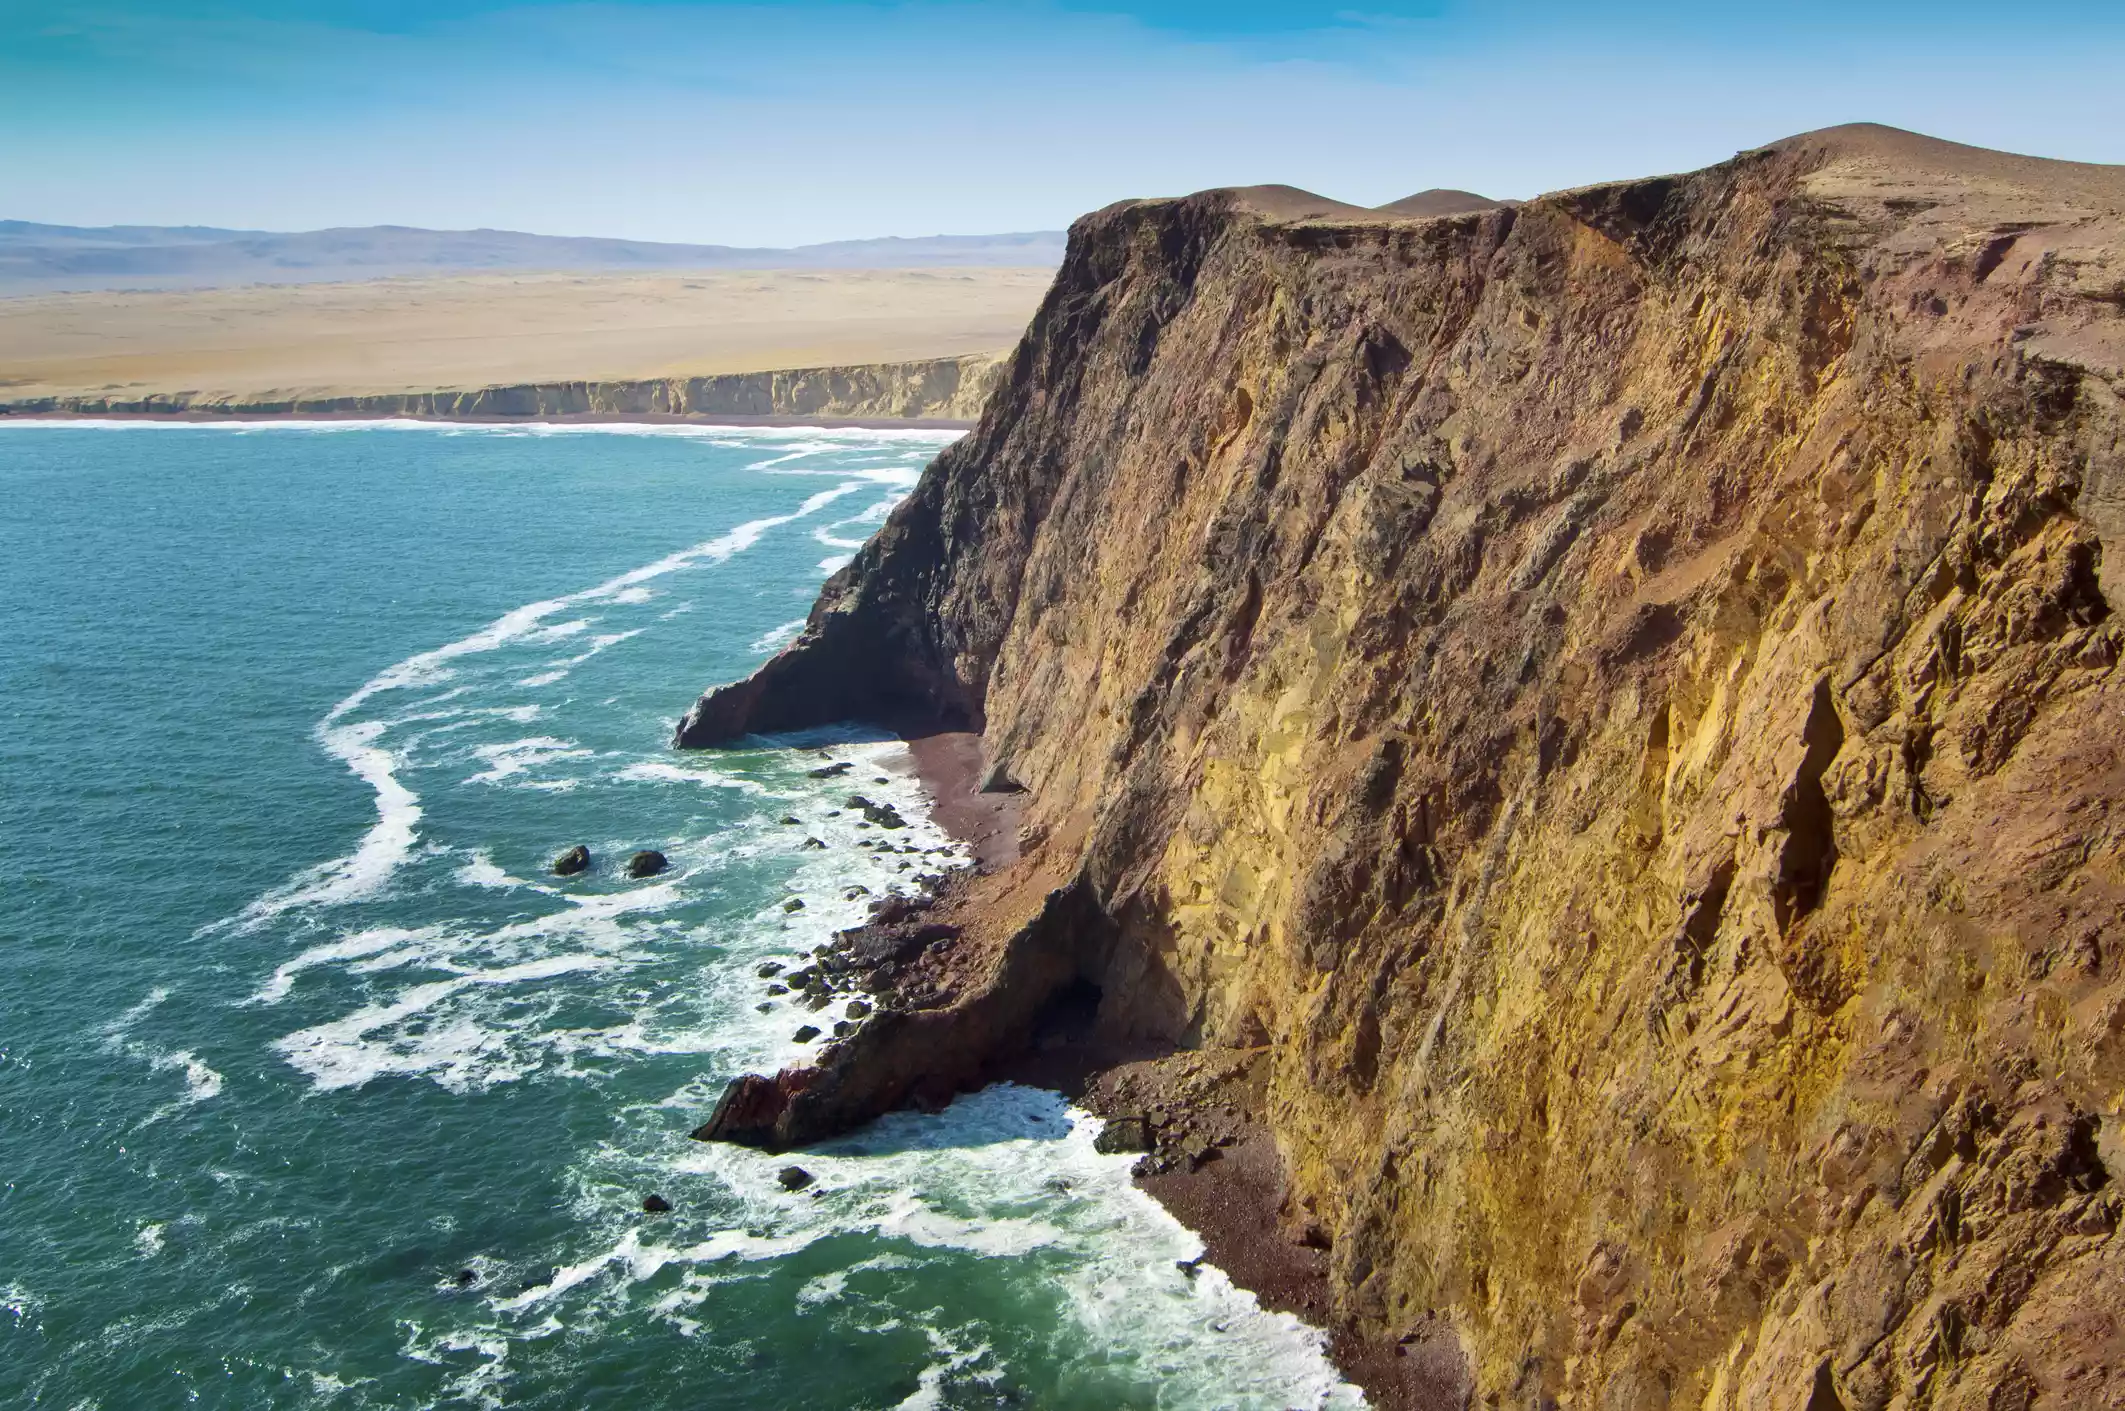 The Paracas cliffs rise above the water at Paracas National Reserve on a clear day